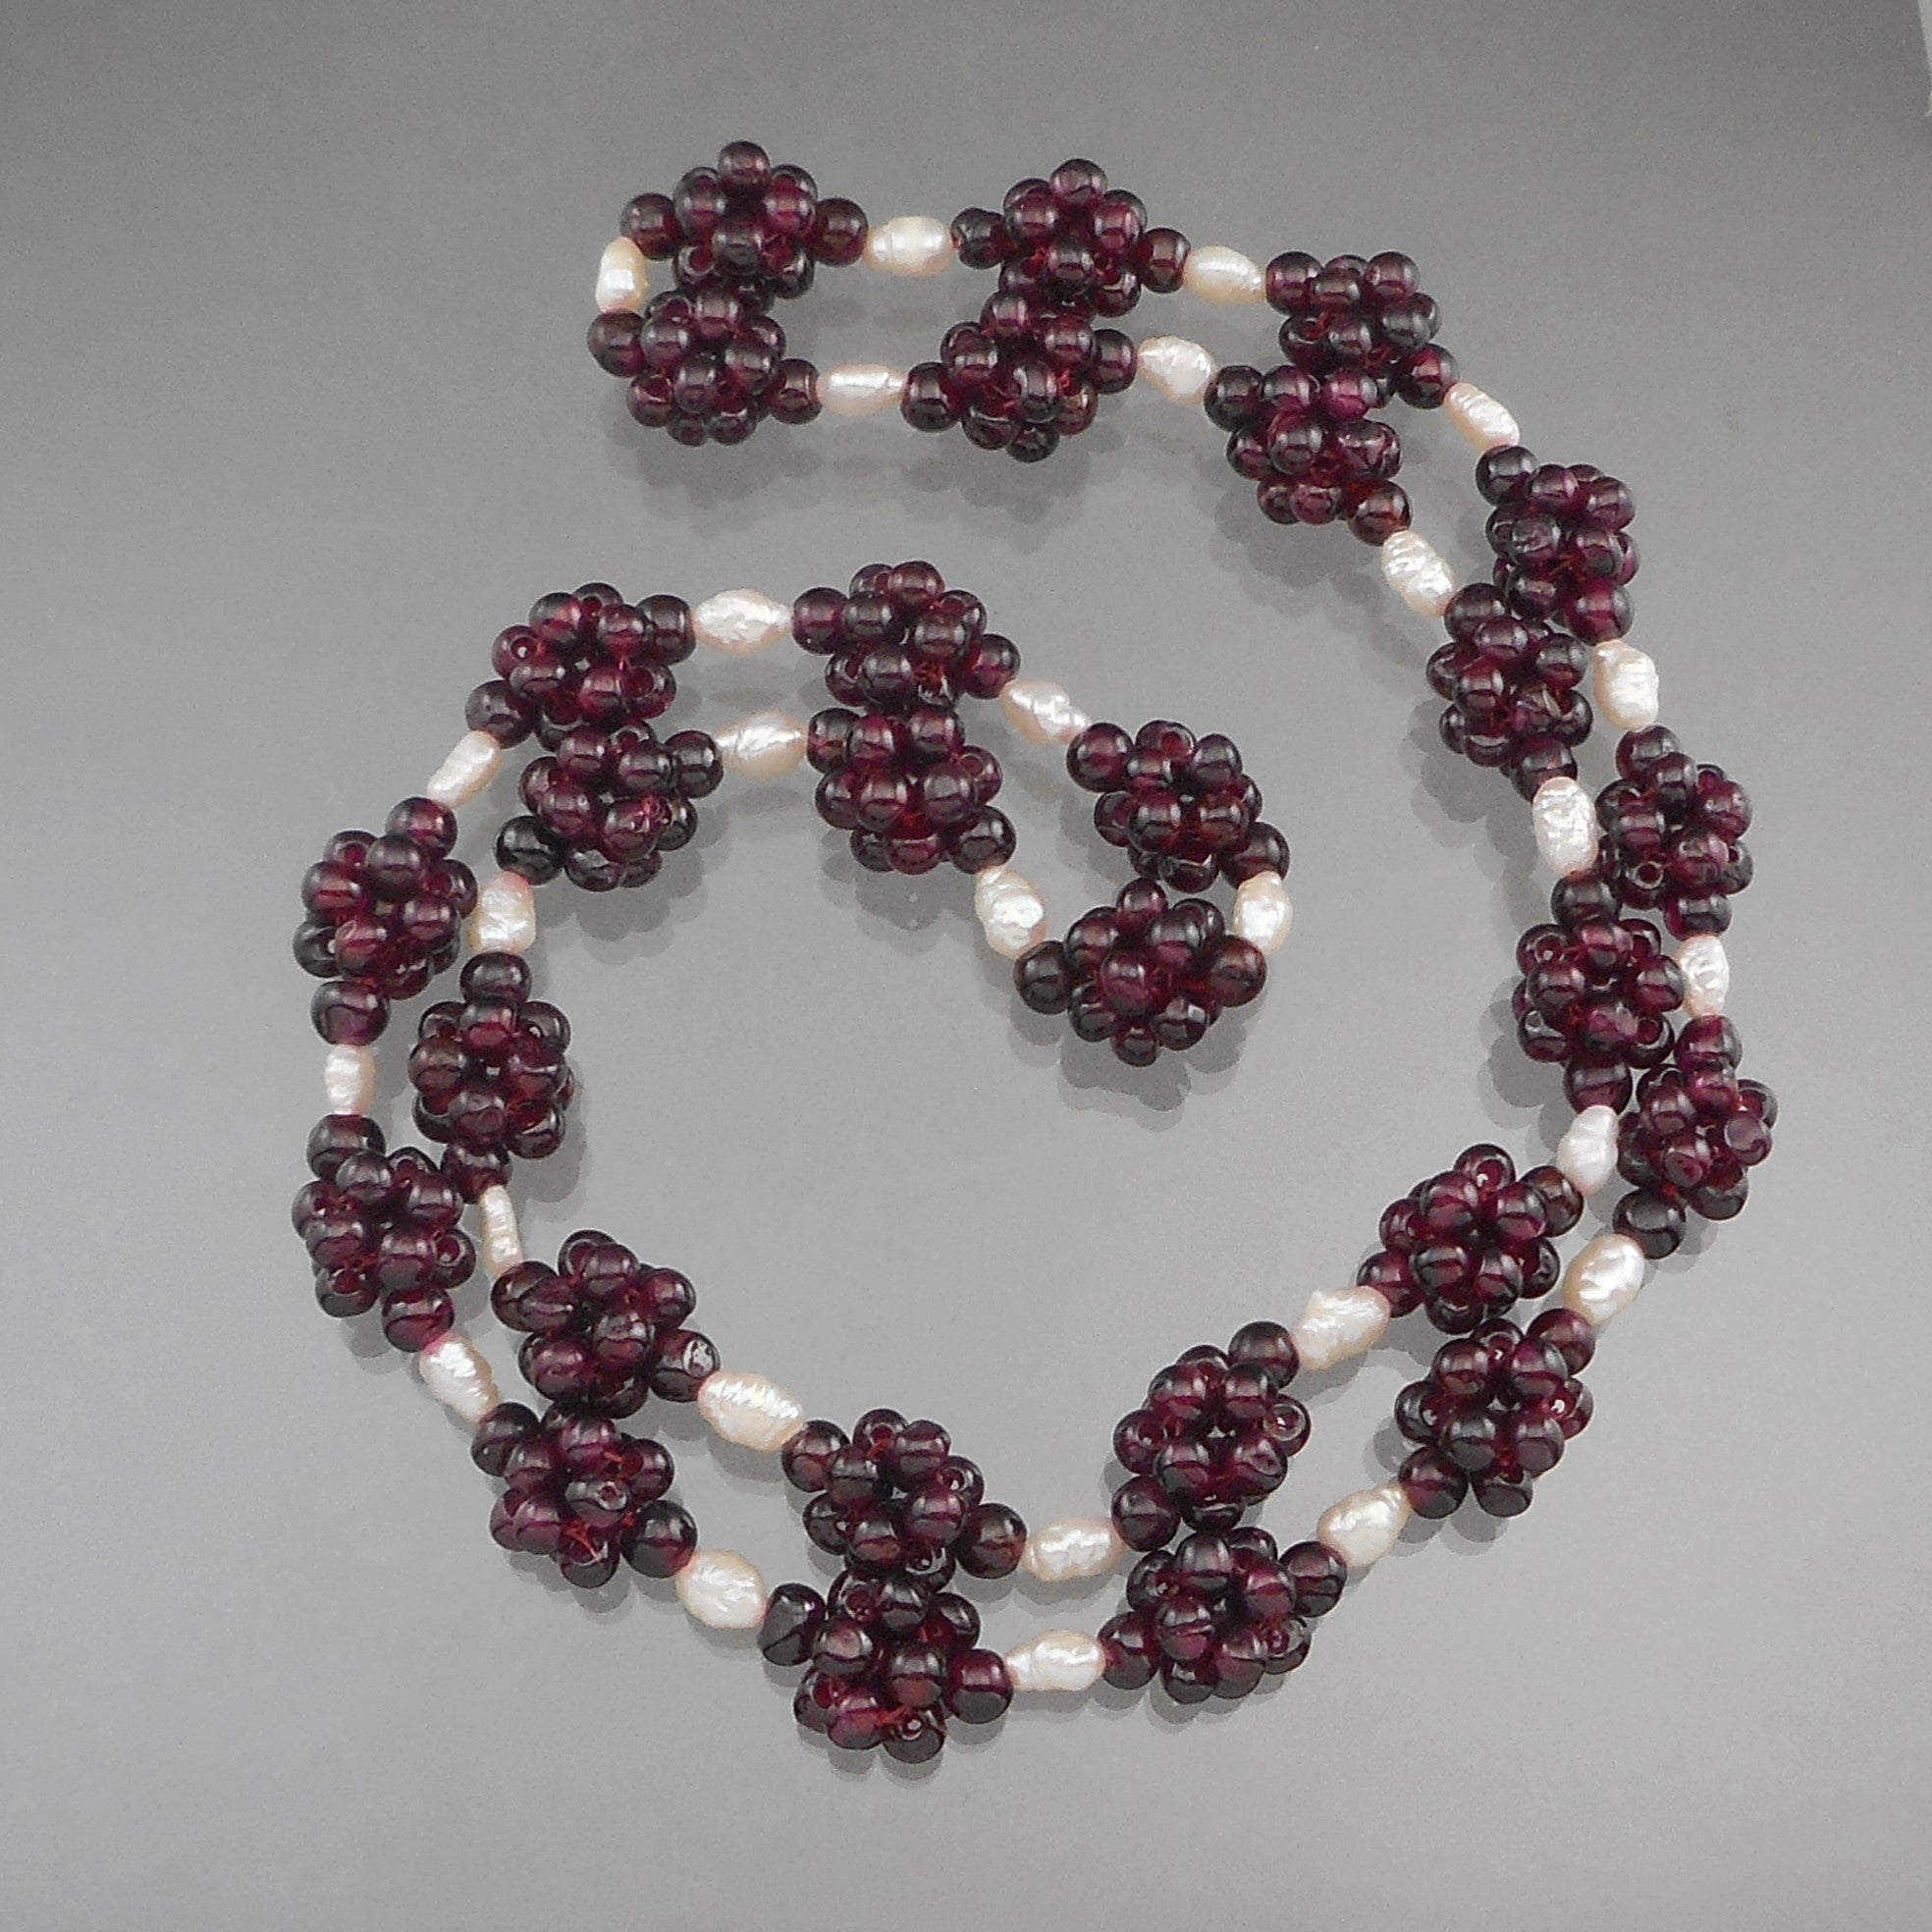 Vintage Handmade Garnet Necklace - Bead Clusters and Natural